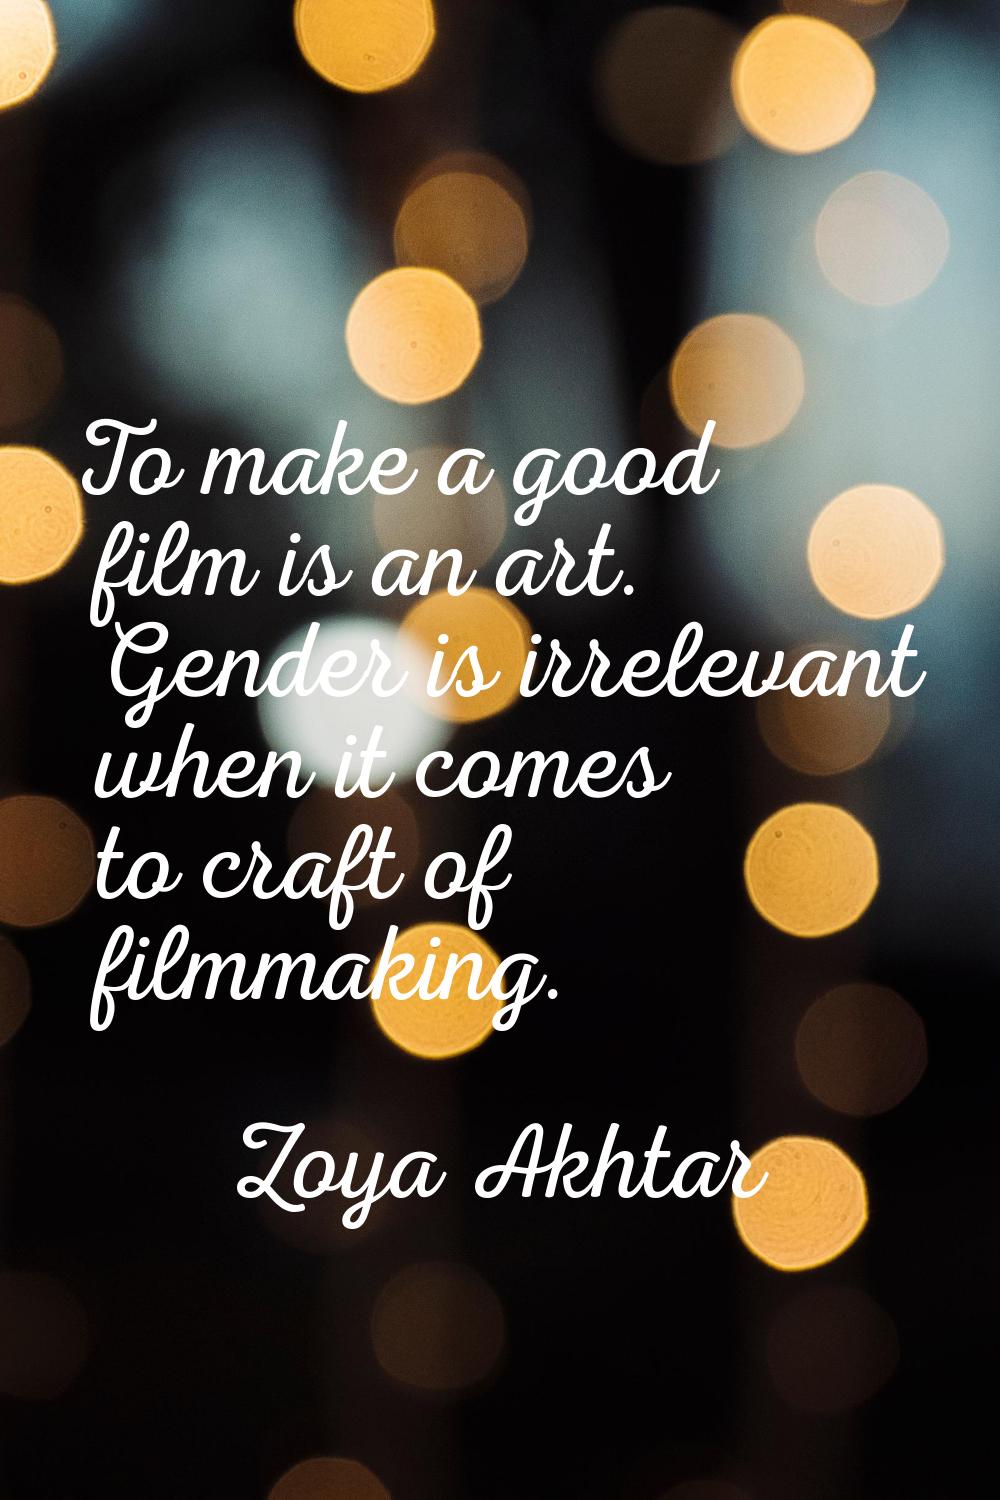 To make a good film is an art. Gender is irrelevant when it comes to craft of filmmaking.